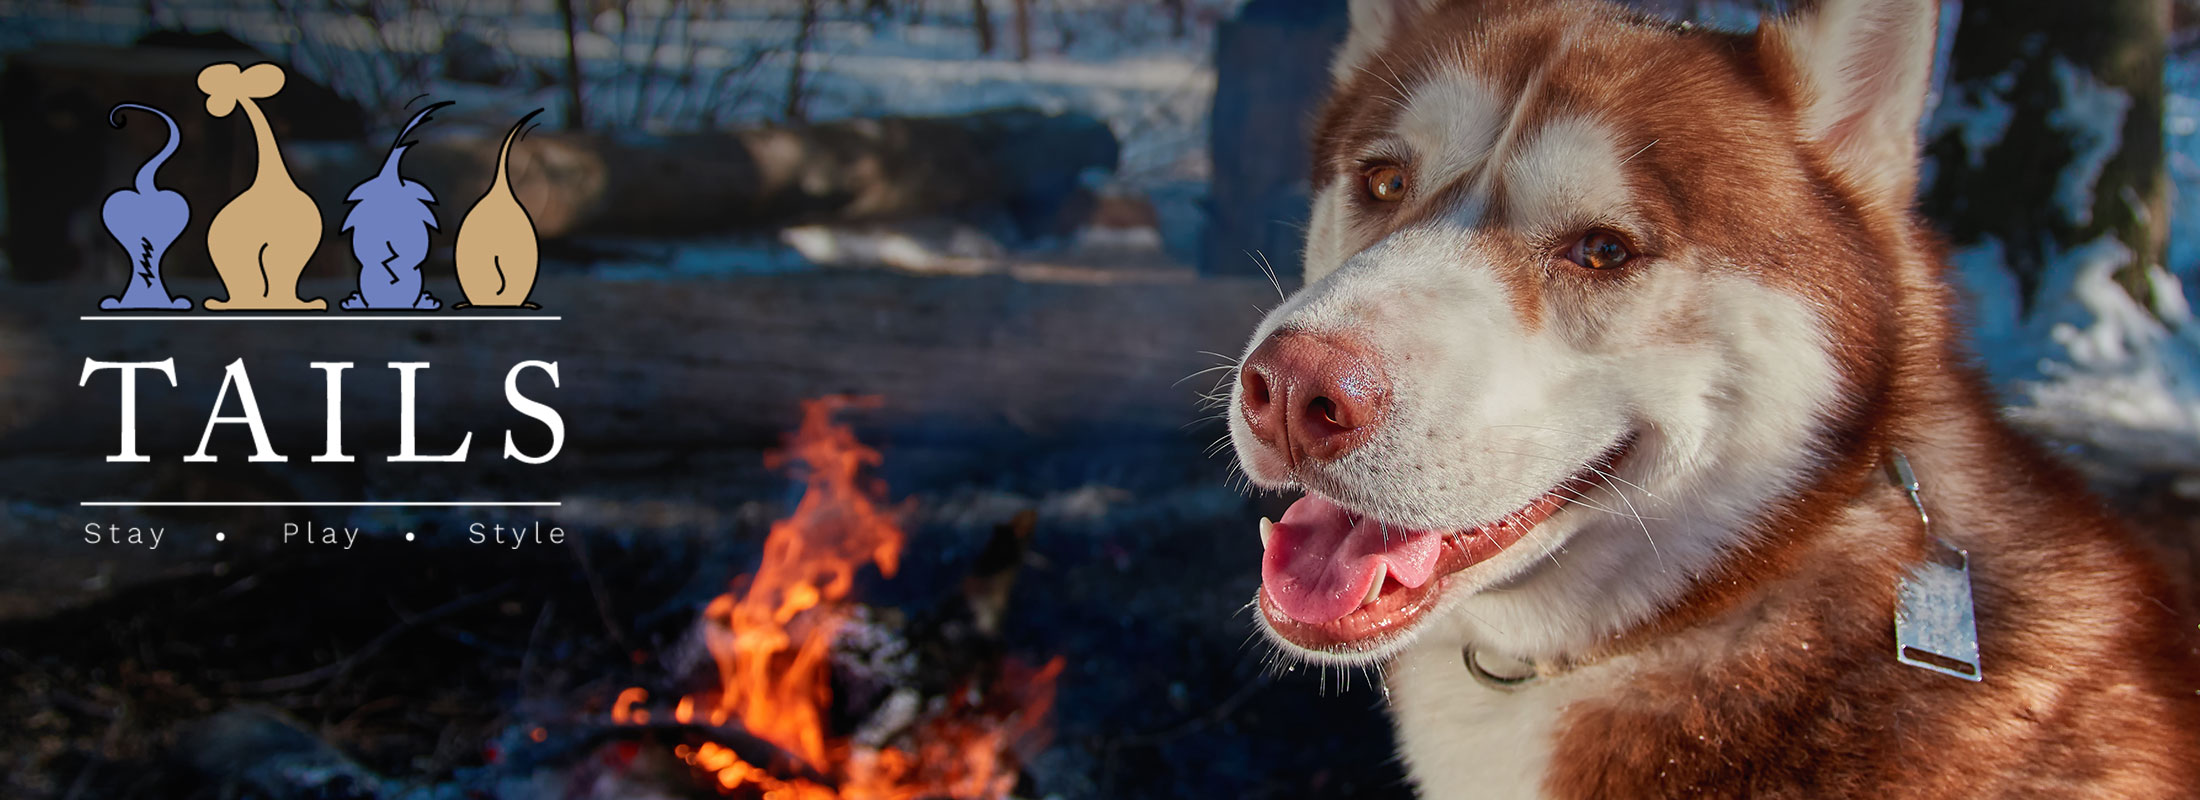 image of dog next to campfire